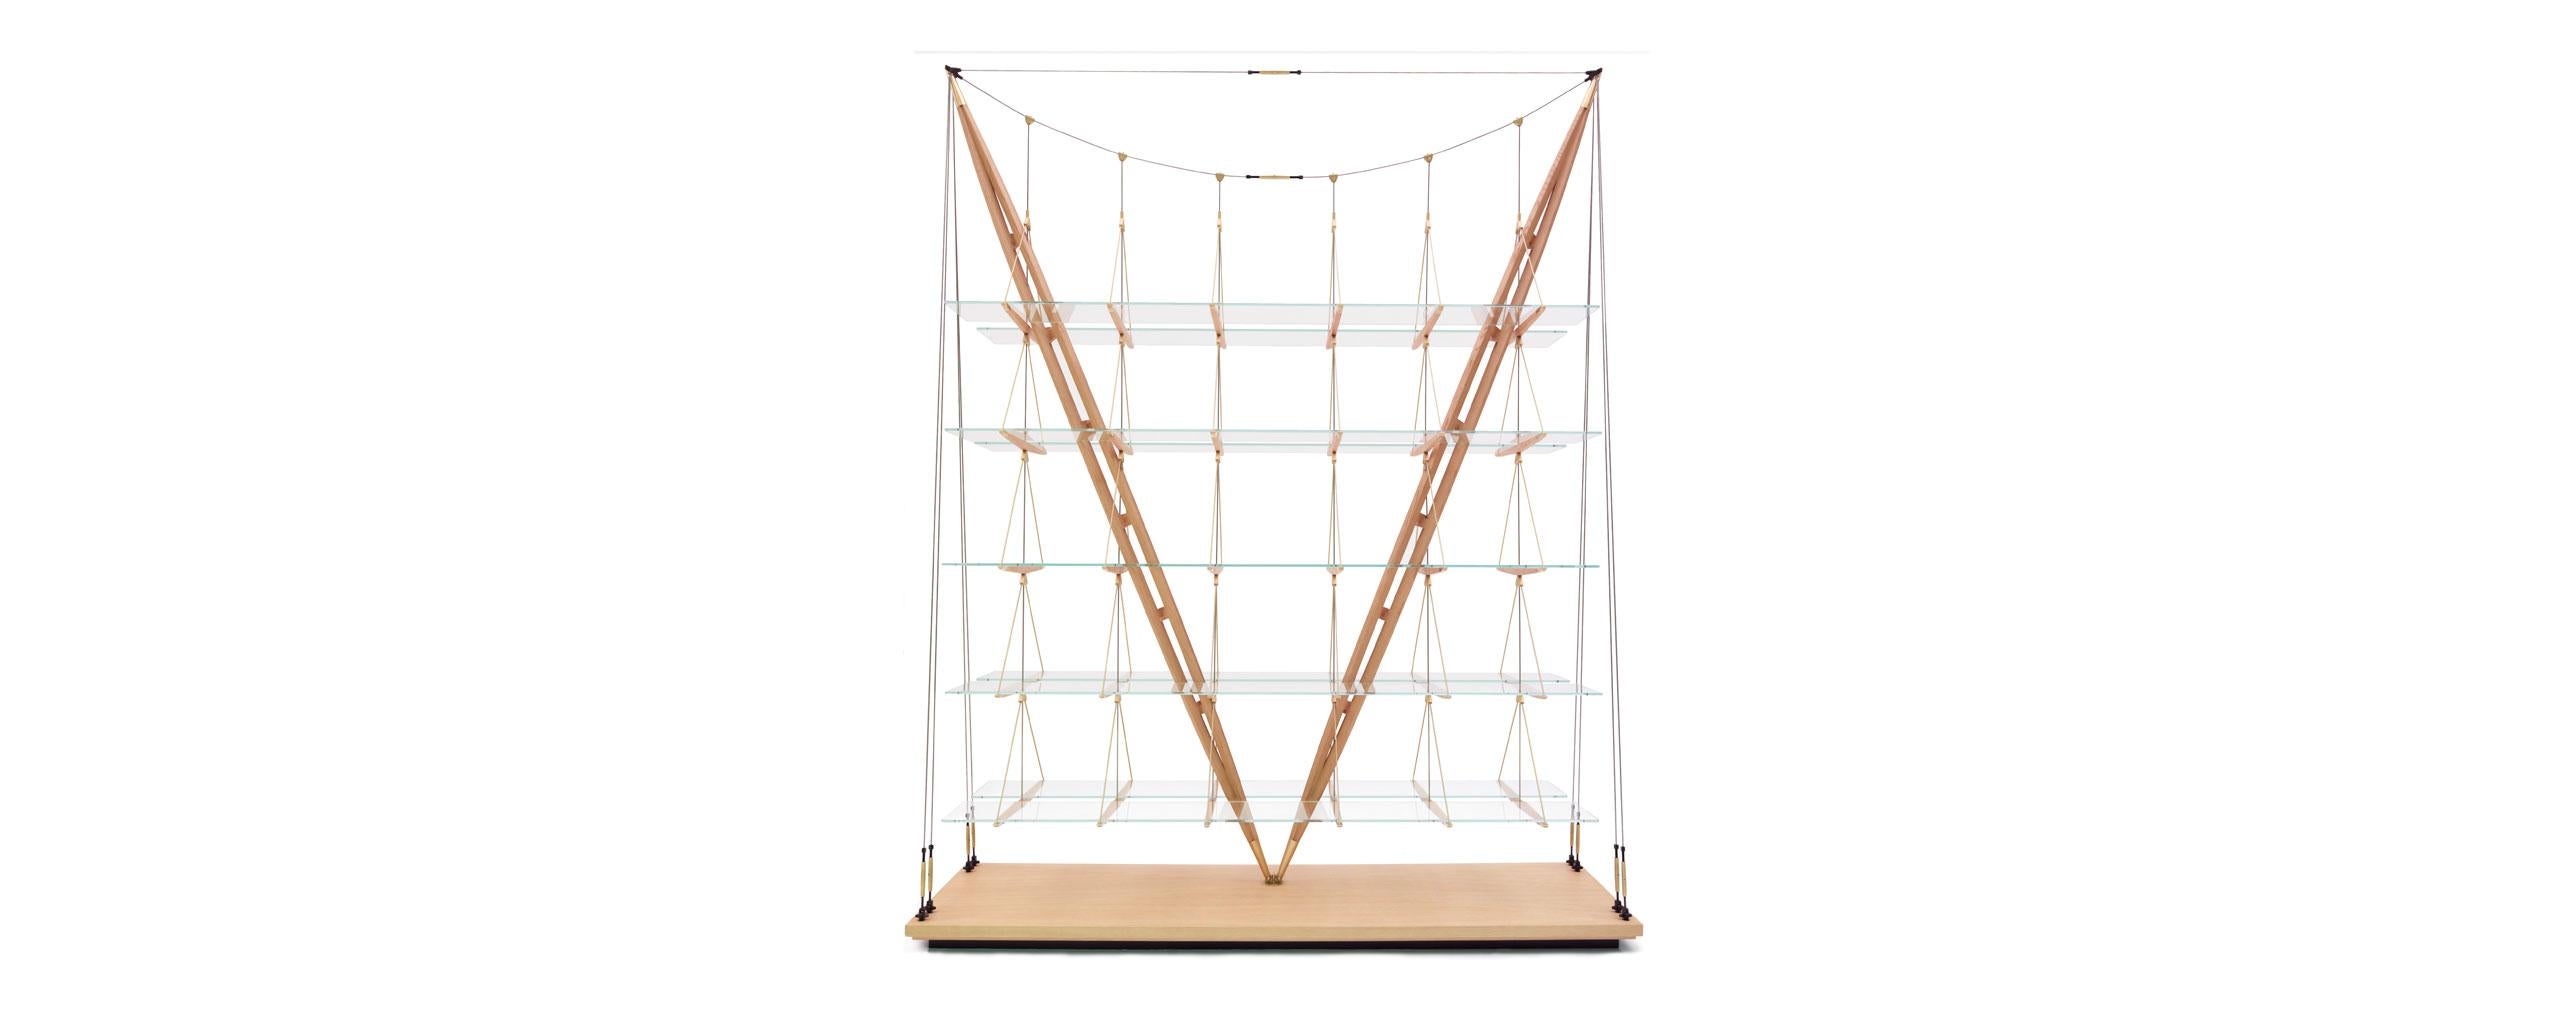 Bookcase designed by Franco Albini in 1940. Relaunched in 2011-19.
Manufactured by Cassina in Italy.

Defying the laws of physics, going beyond what we normally understand by the conditions of equilibrium, this bookcase is nothing short of a